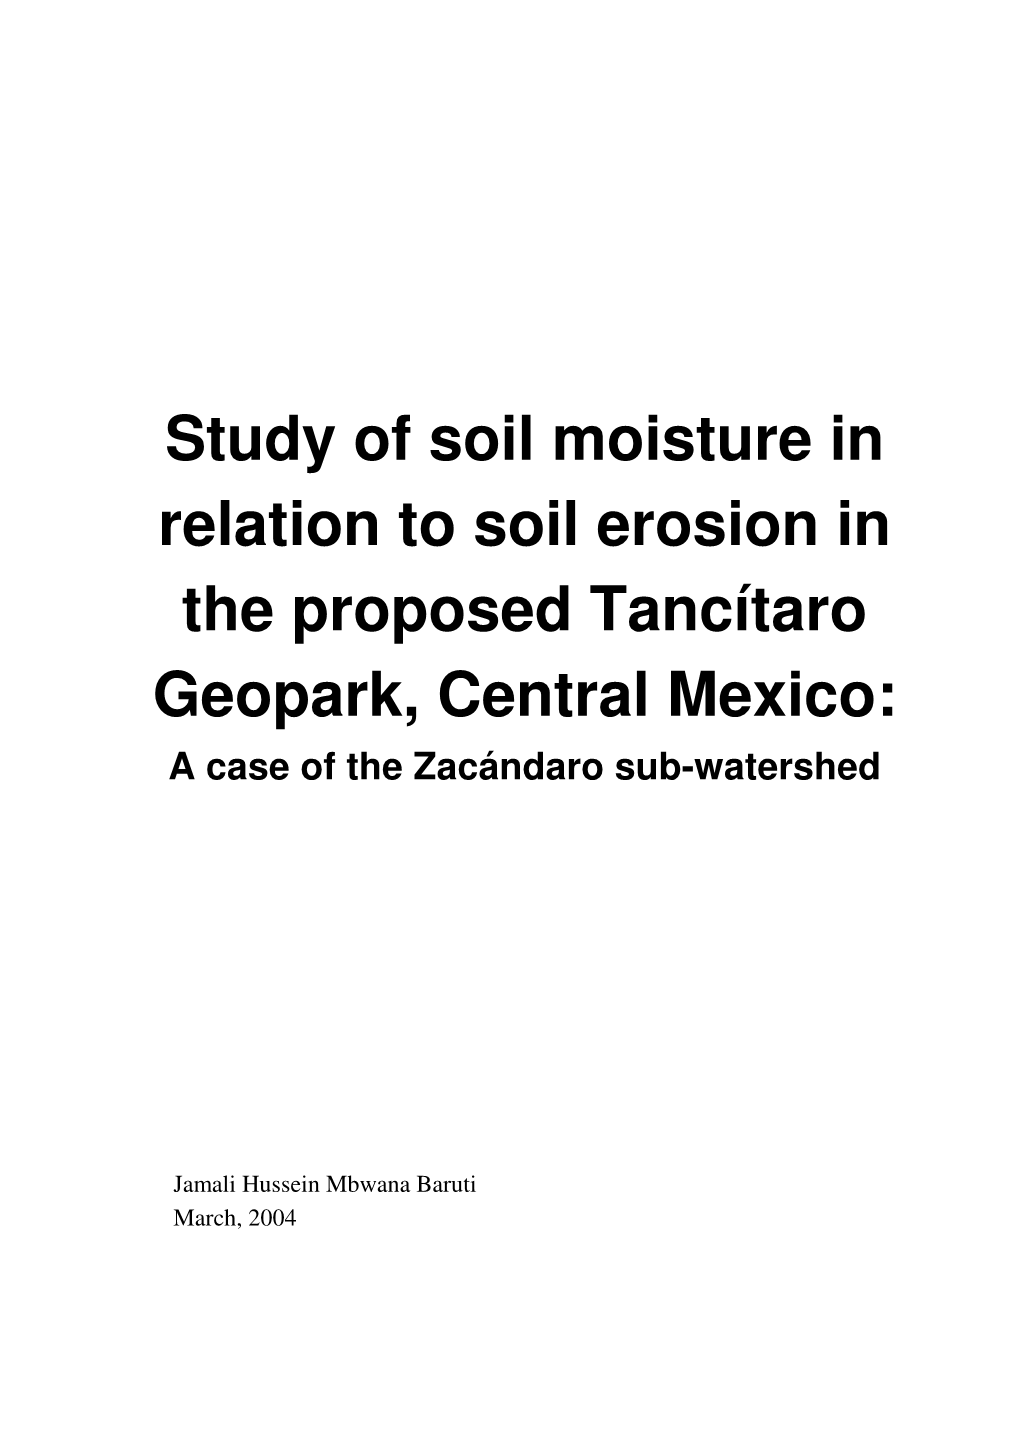 Study of Soil Moisture in Relation to Soil Erosion in the Proposed Tancítaro Geopark, Central Mexico: a Case of the Zacándaro Sub-Watershed